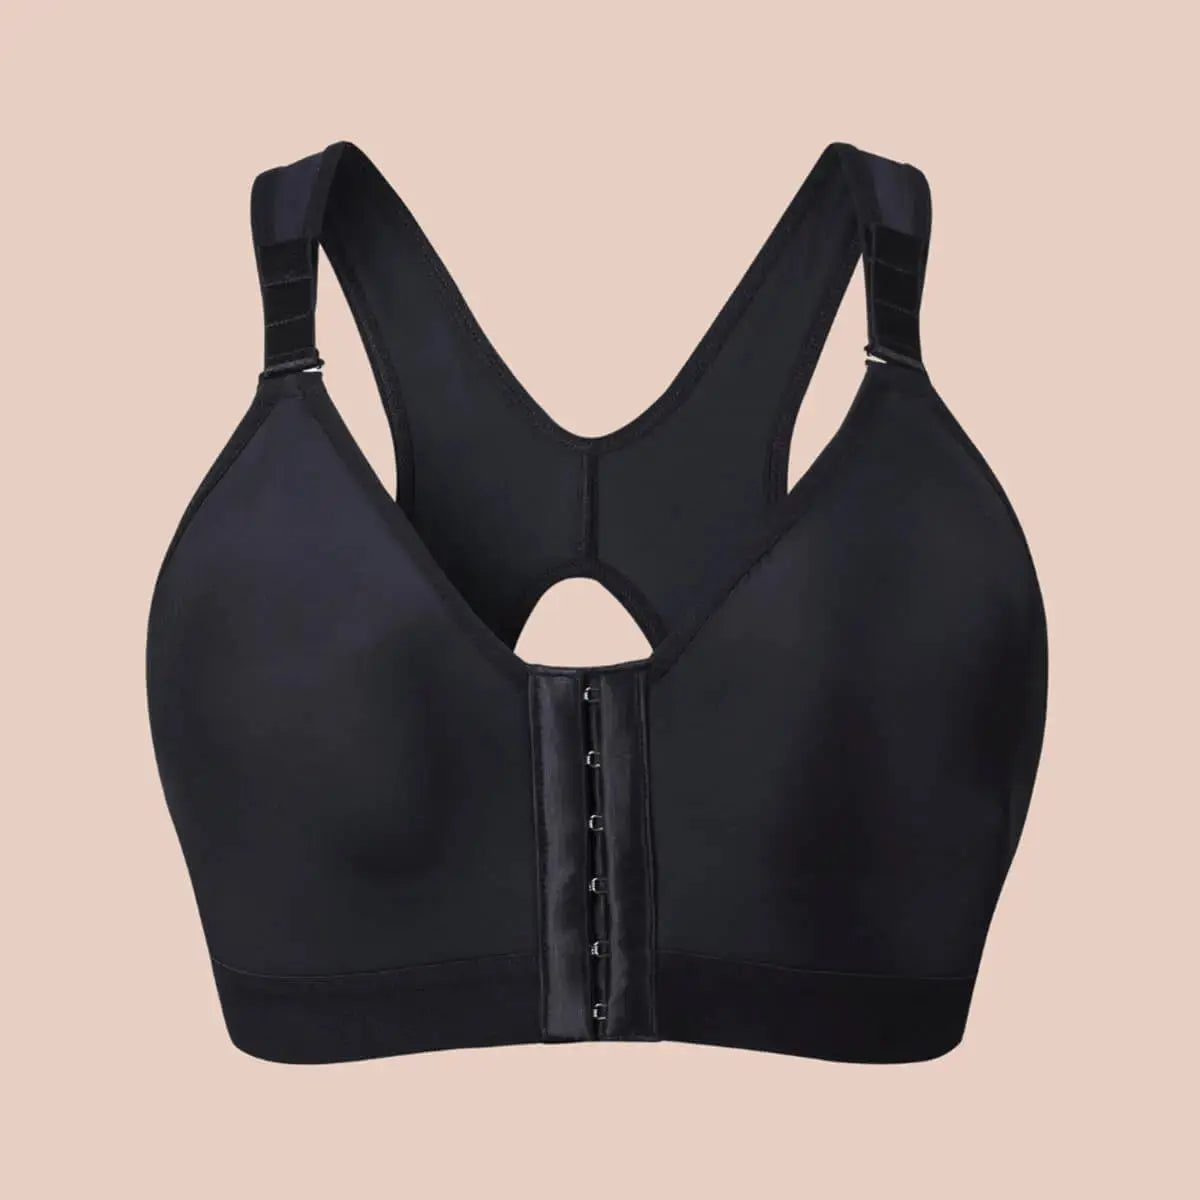 RDSIANE Post-Surgery Front Closure Bra for Women Posture Corrector Shapewear  Tops with Breast Support Band (Black, Small) price in UAE,  UAE